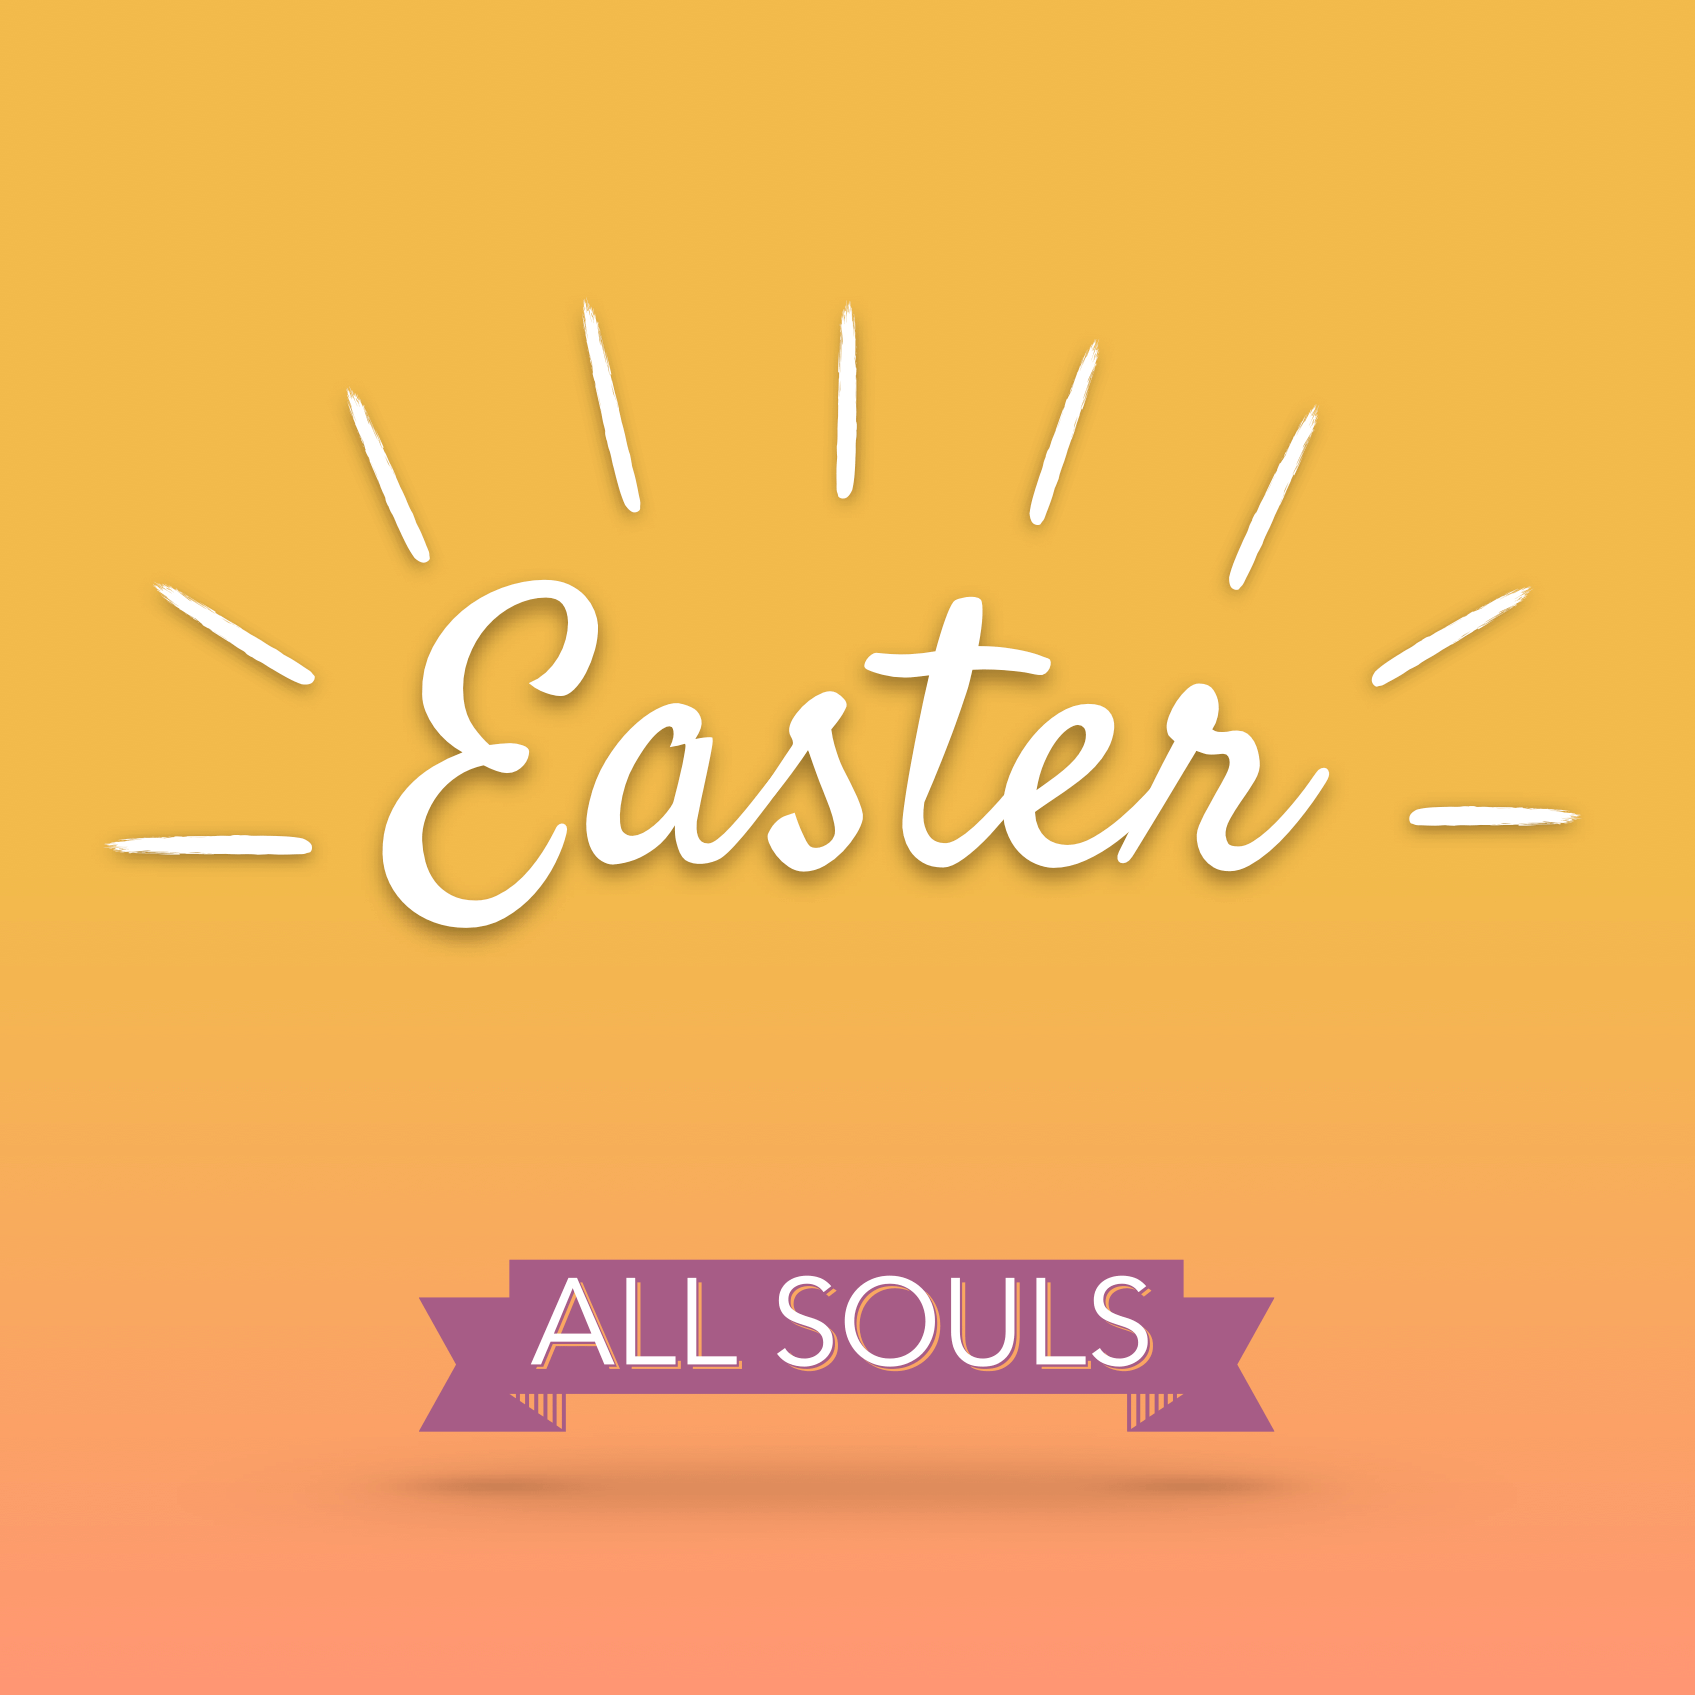 Gradient background with the word Easter